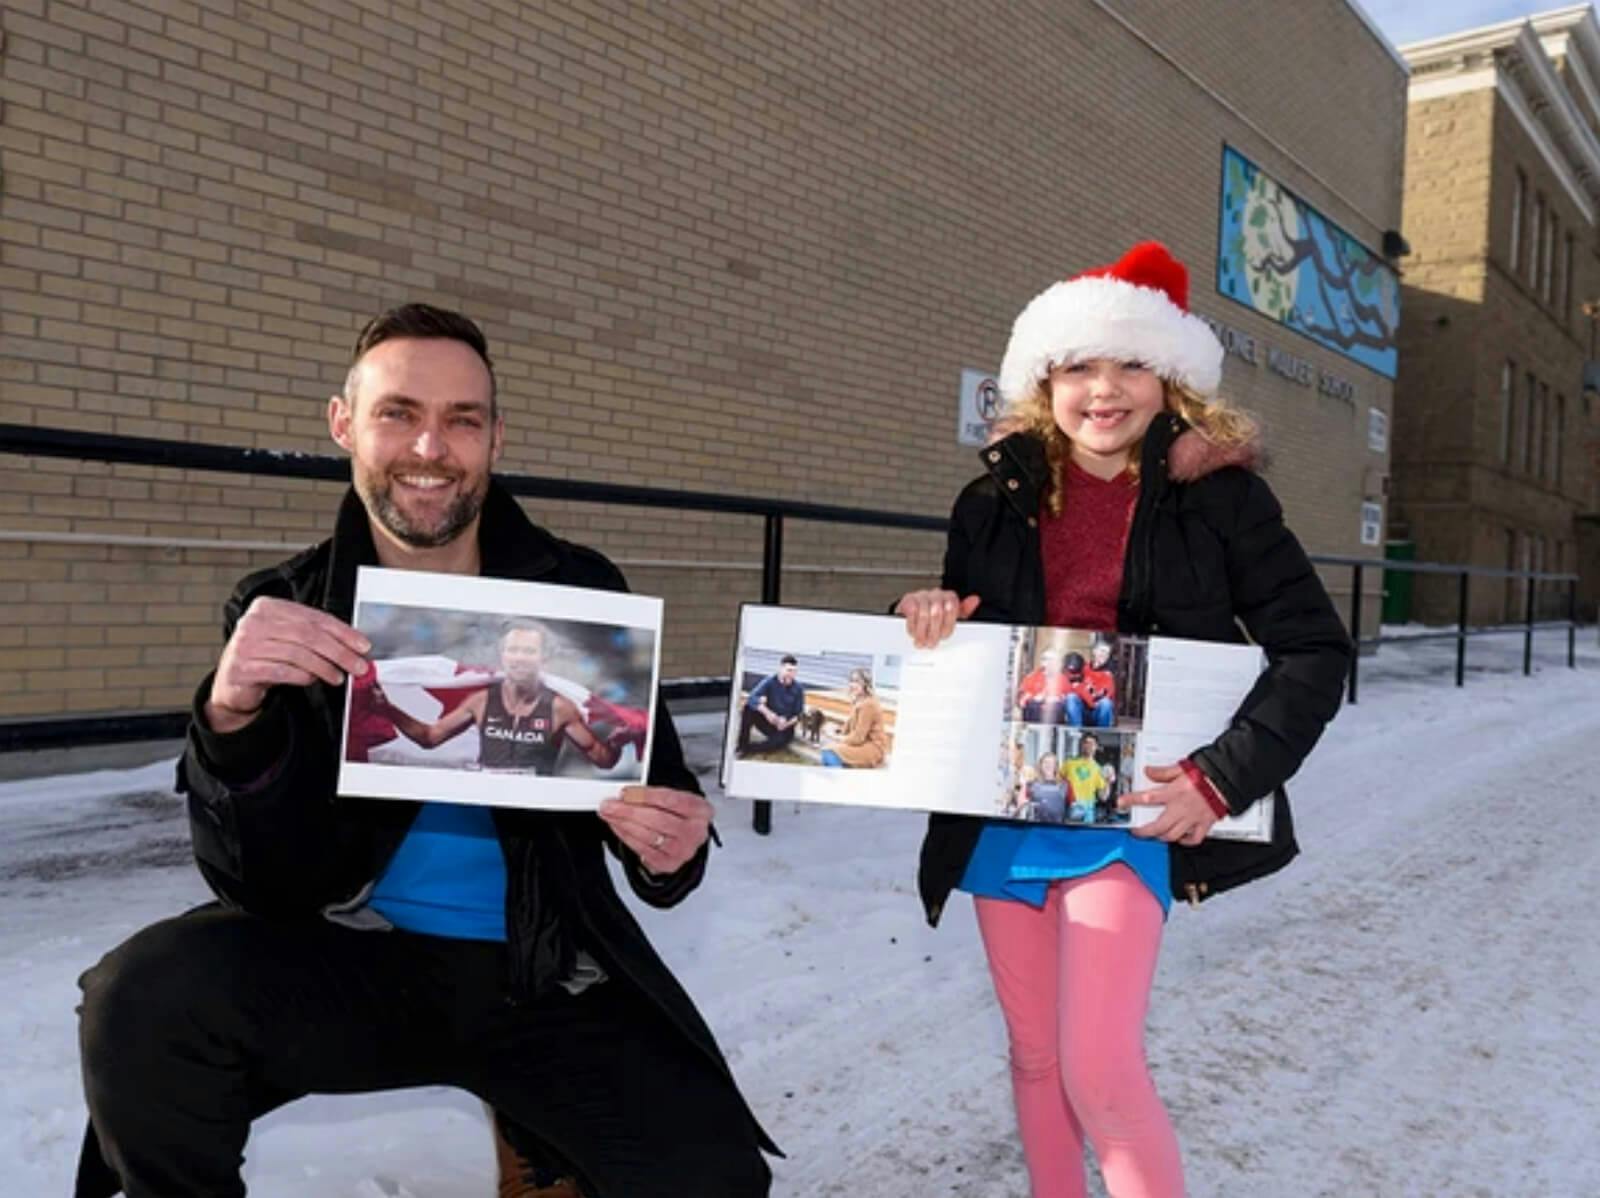 Grade 3 teacher Geoff Kearney holding a photo of Canadian Paralympian Nate Riech, and student Josephine Brown